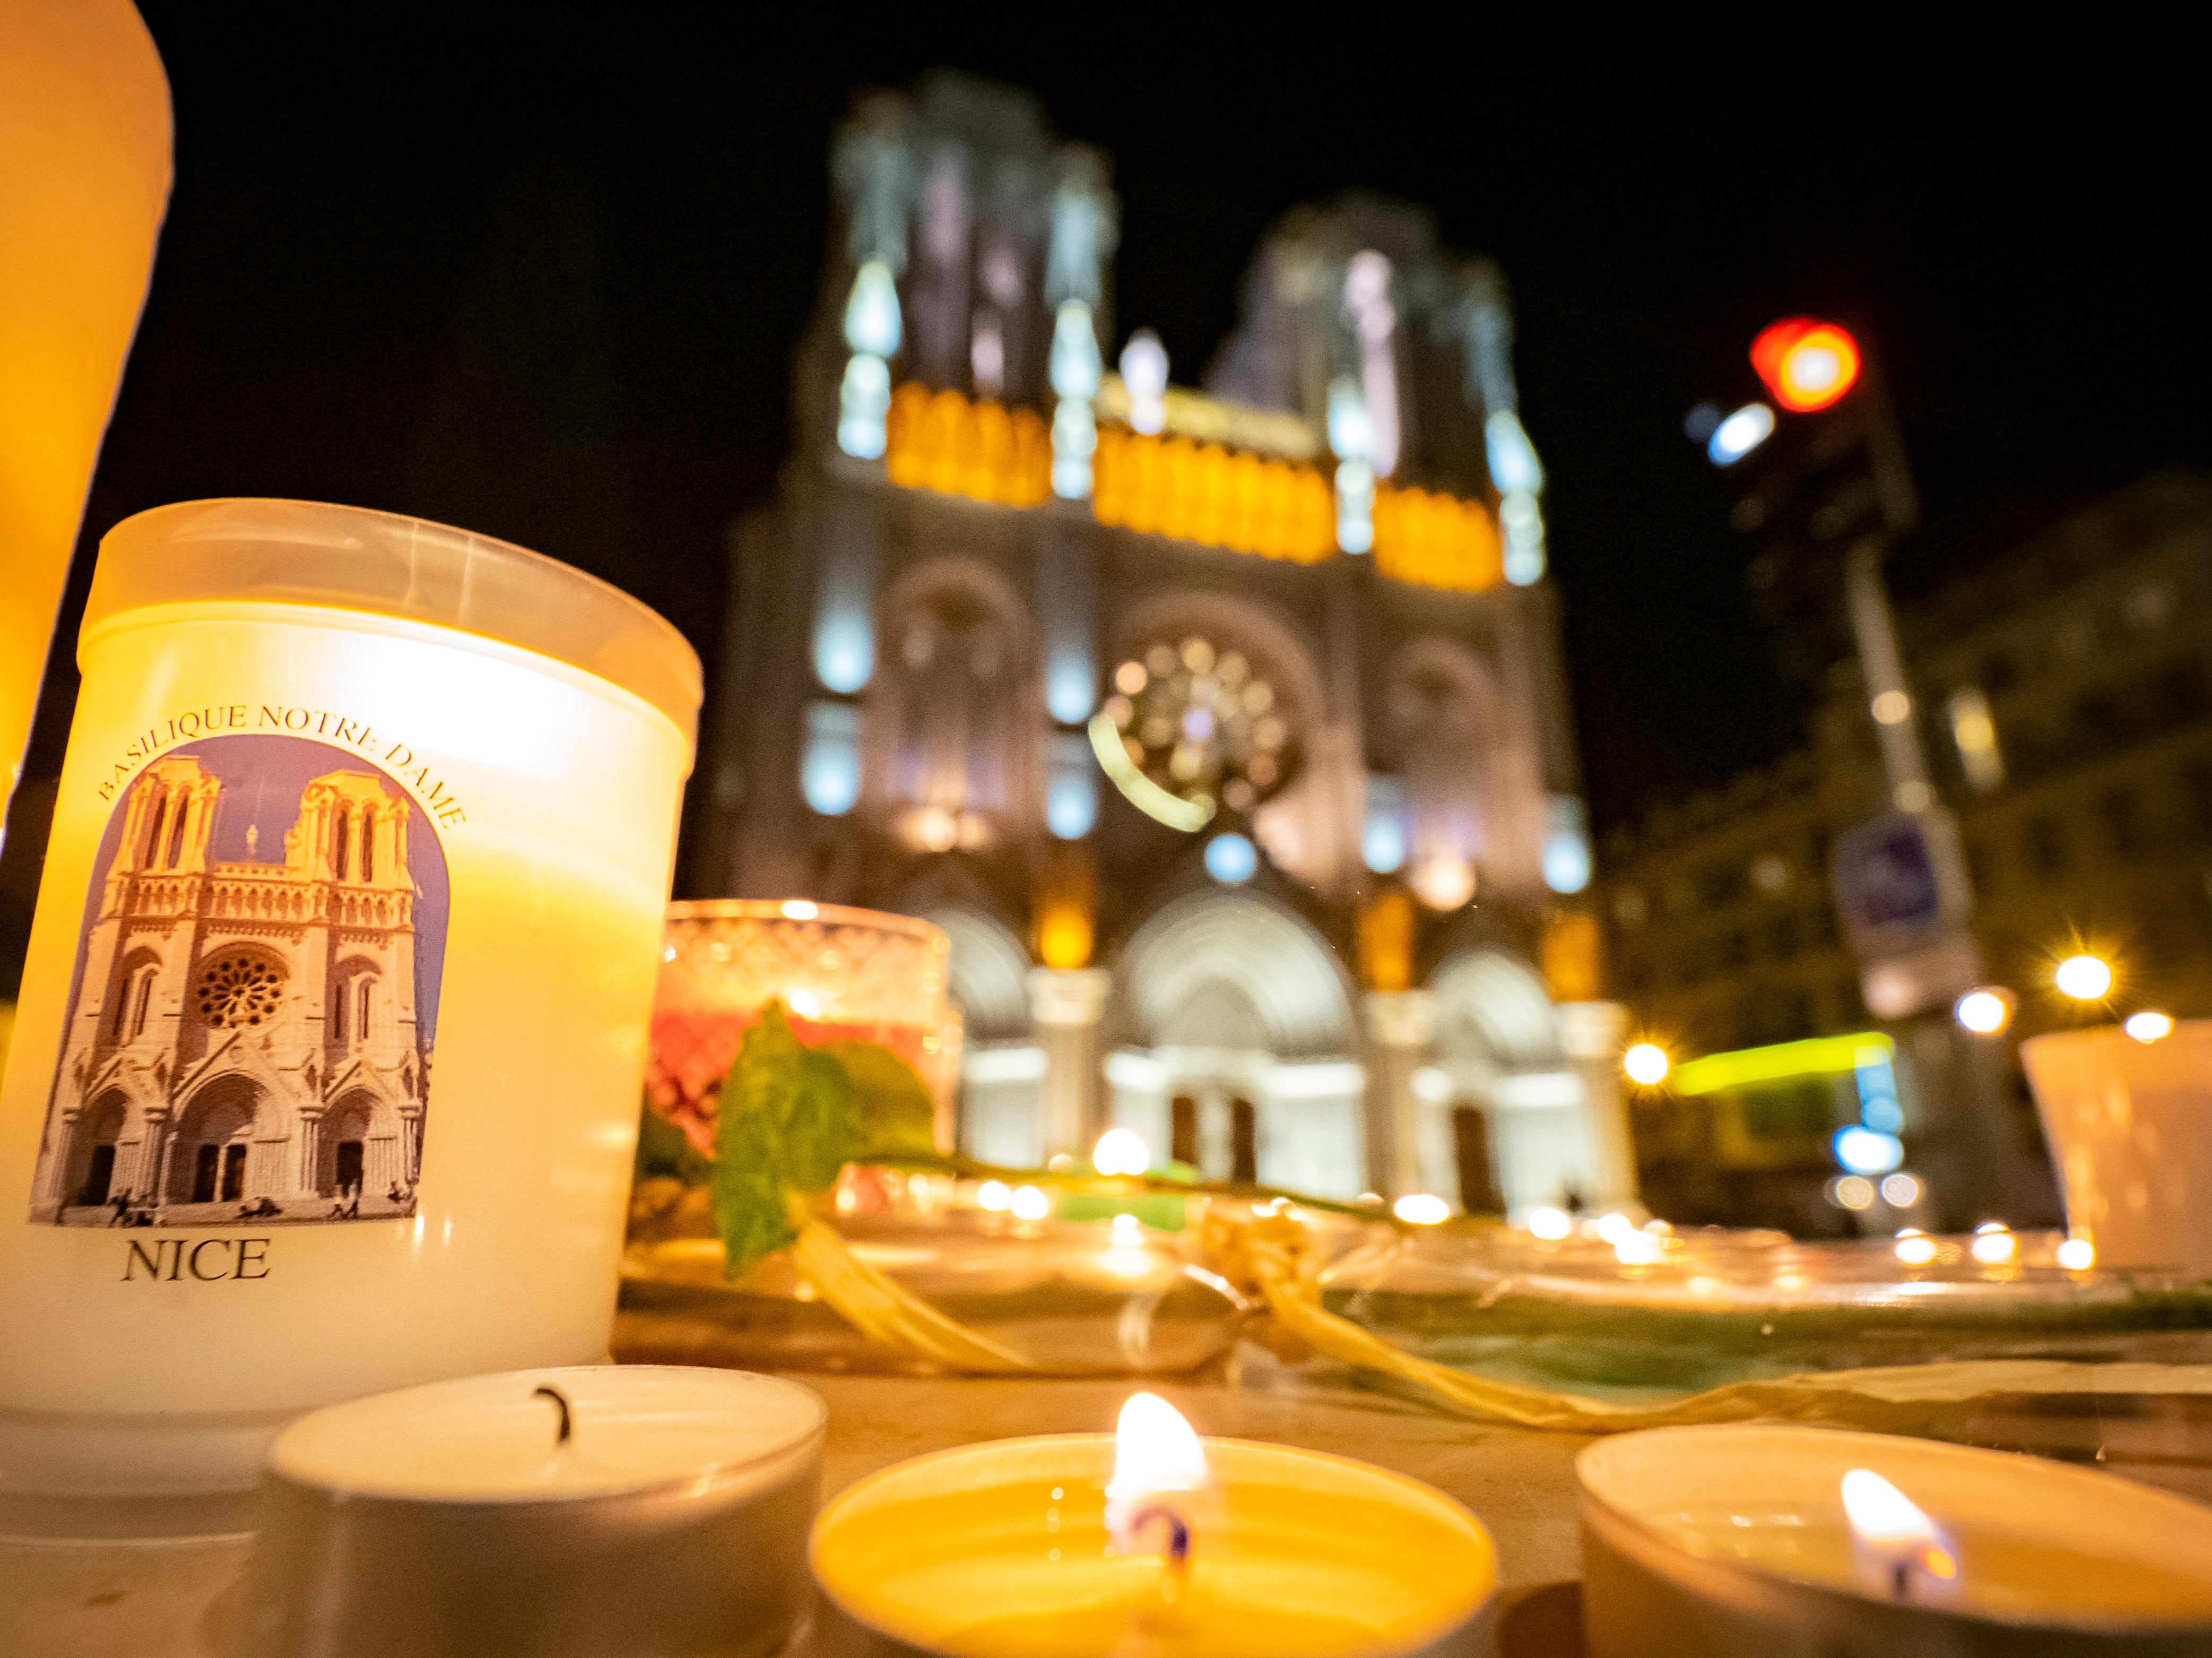 People pay tribute at night in front of Notre Dame Basilica on October 29, 2020 in Nice, France